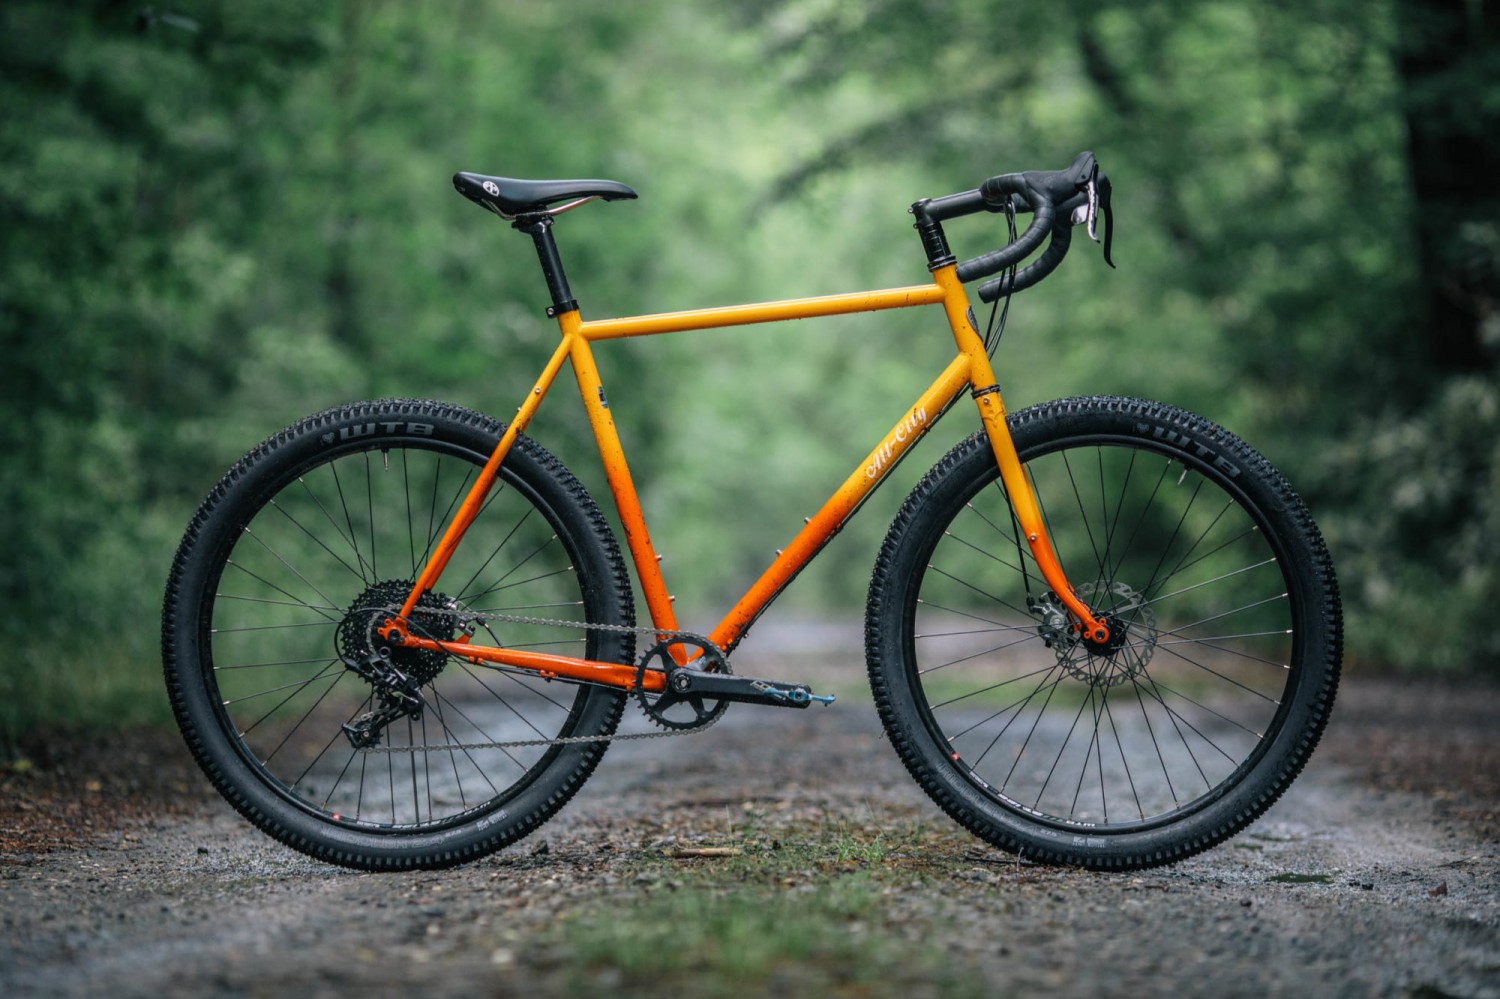 All-City’s Gorilla Monsoon bicycle in yellow frame